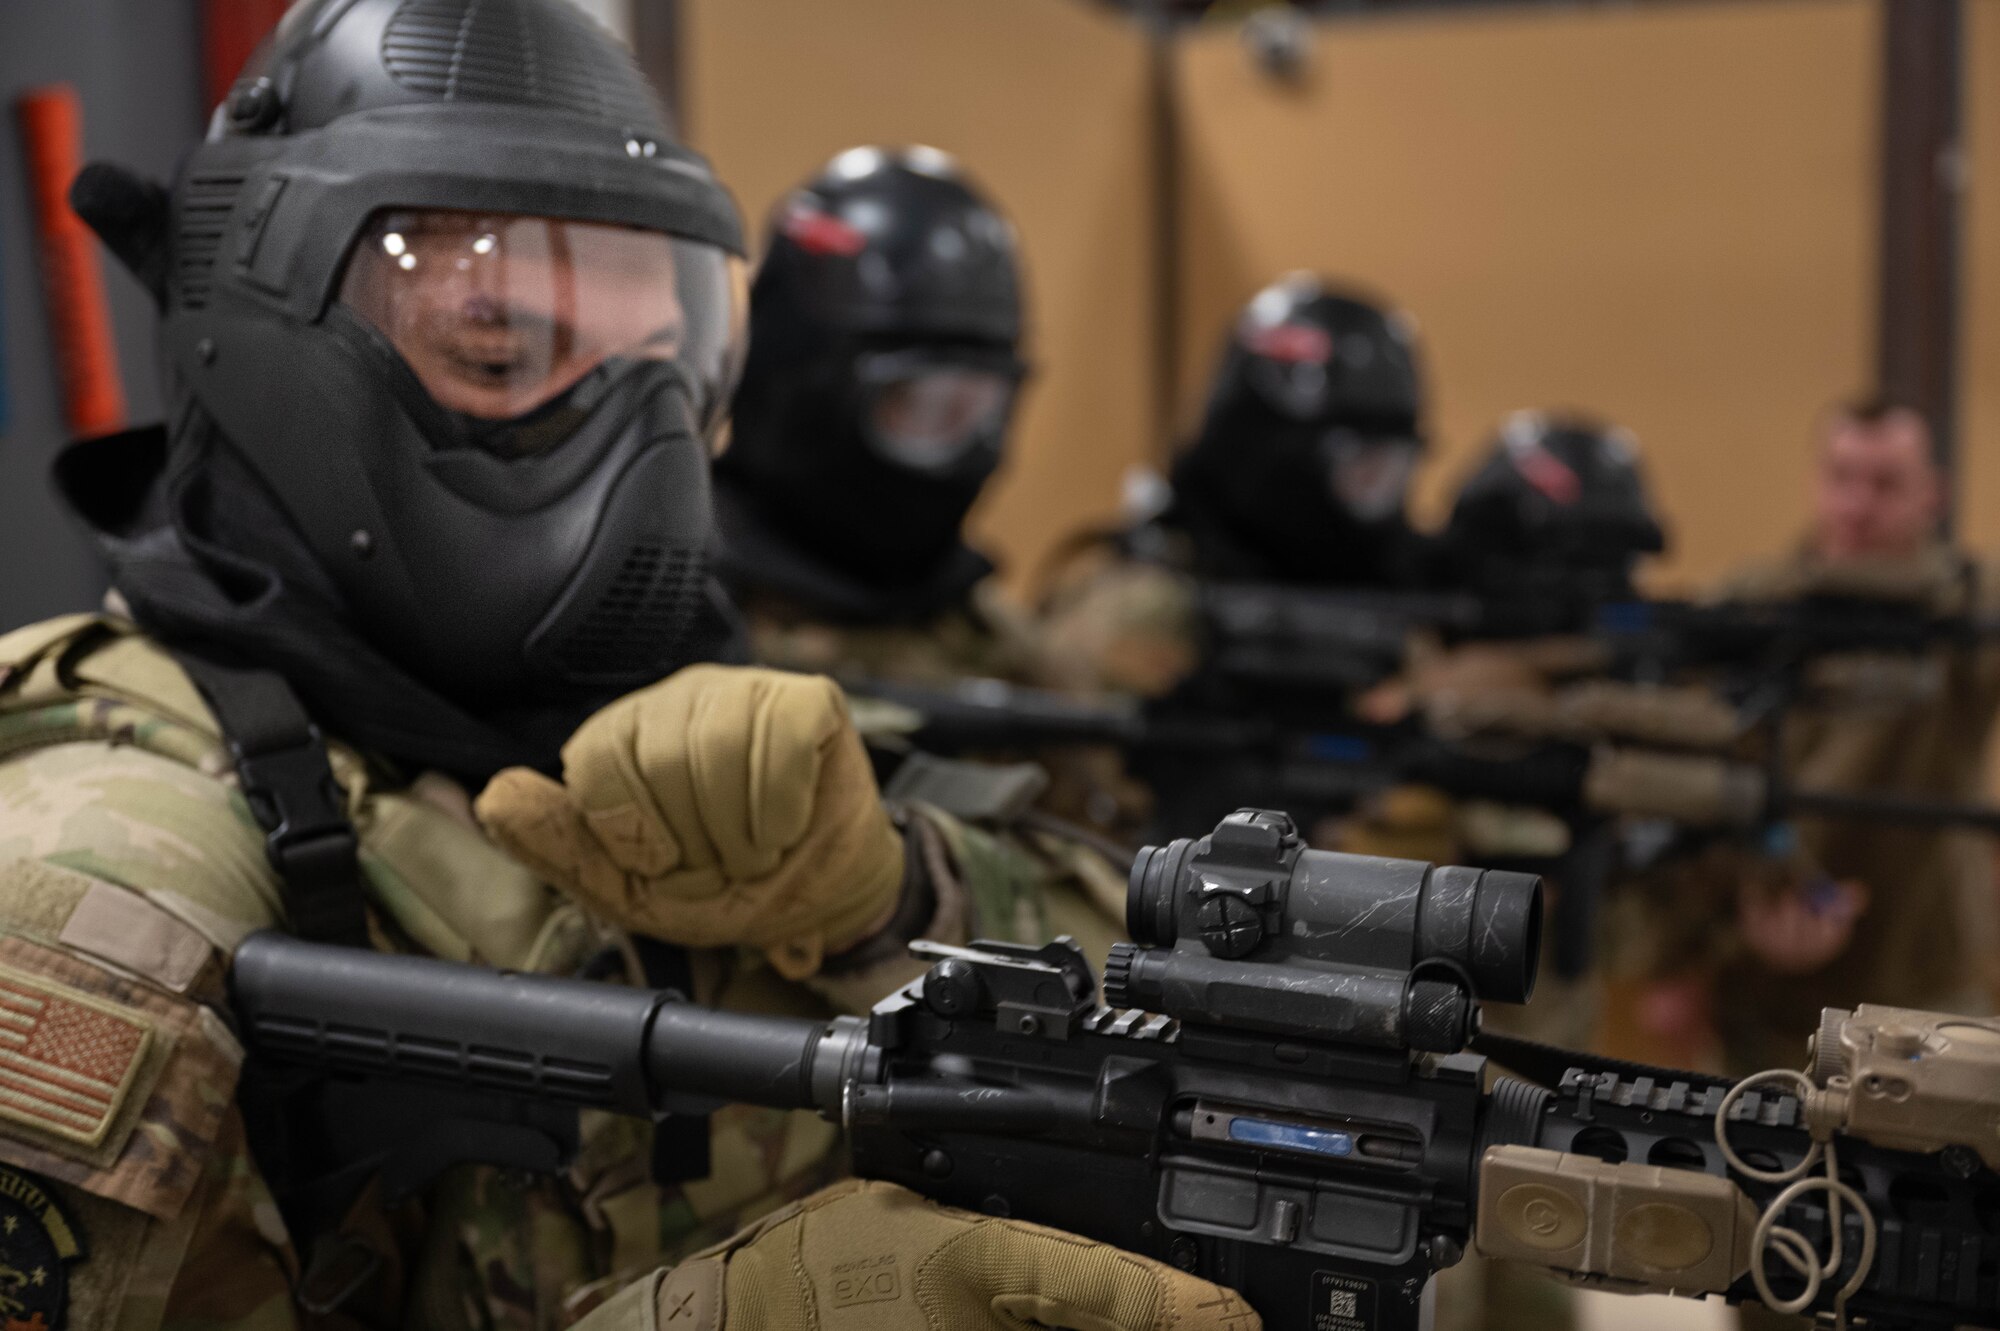 310th and 710th Security Forces learn threat elimination tactics from local SWAT, former Army Ranger